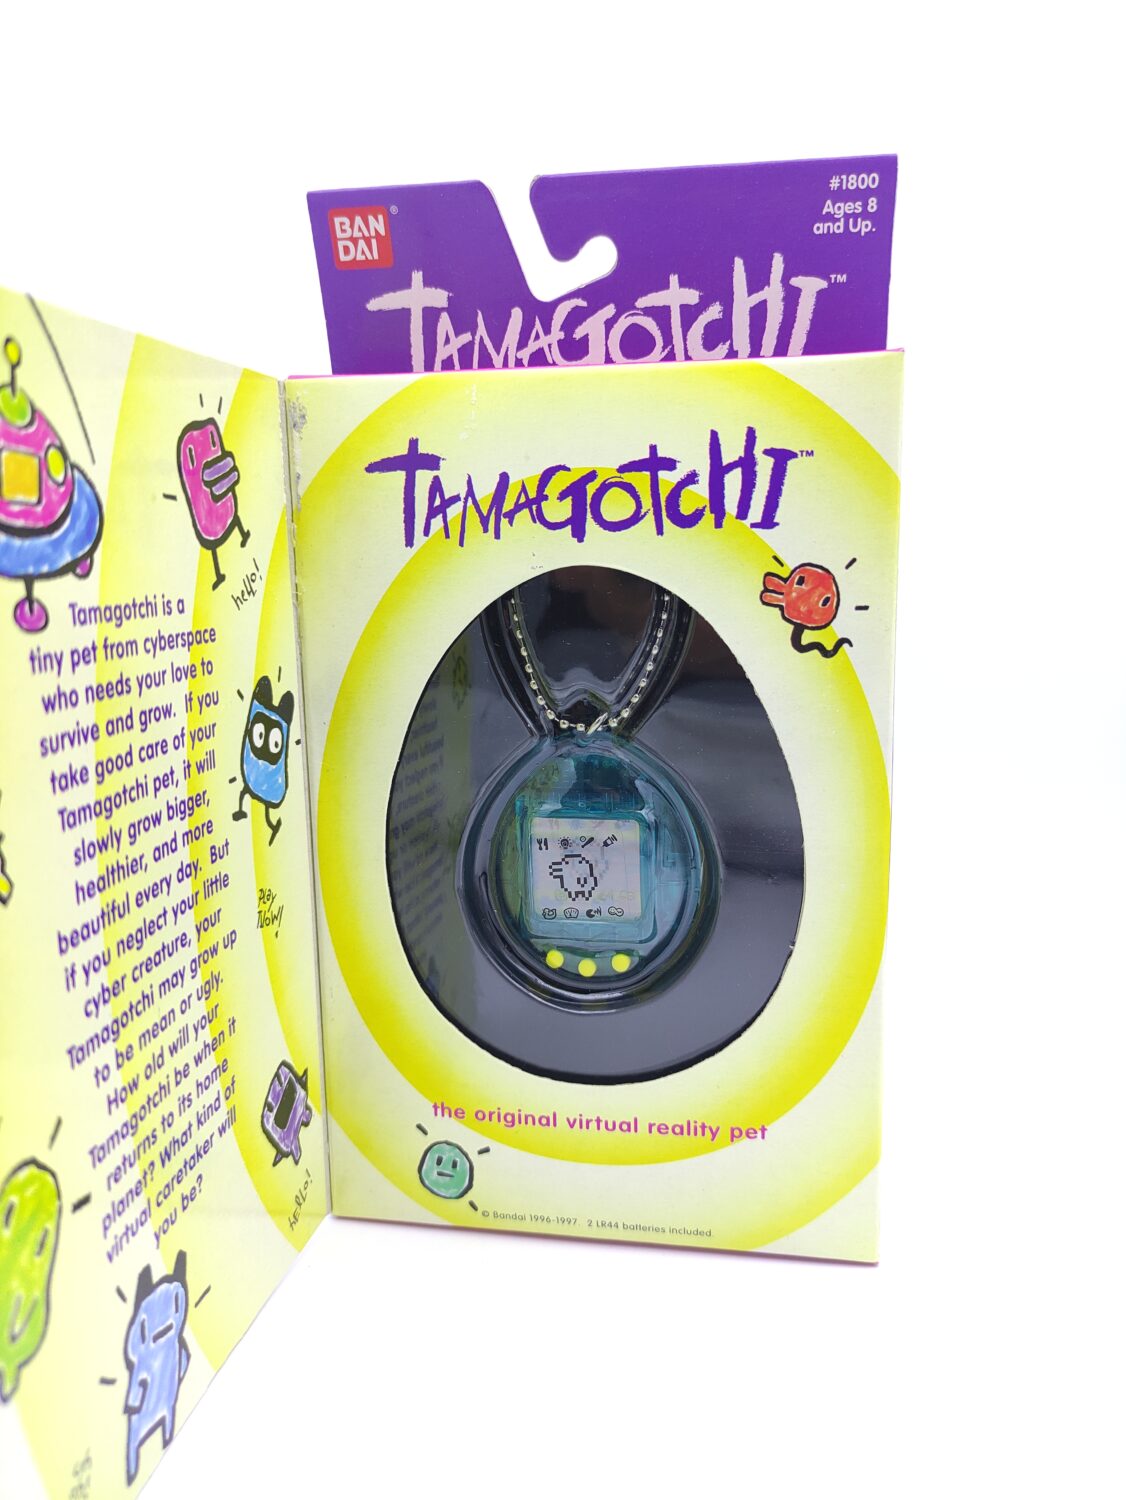 1996 TAMAGOTCHI First generation BANDAI official product NEW Unopened